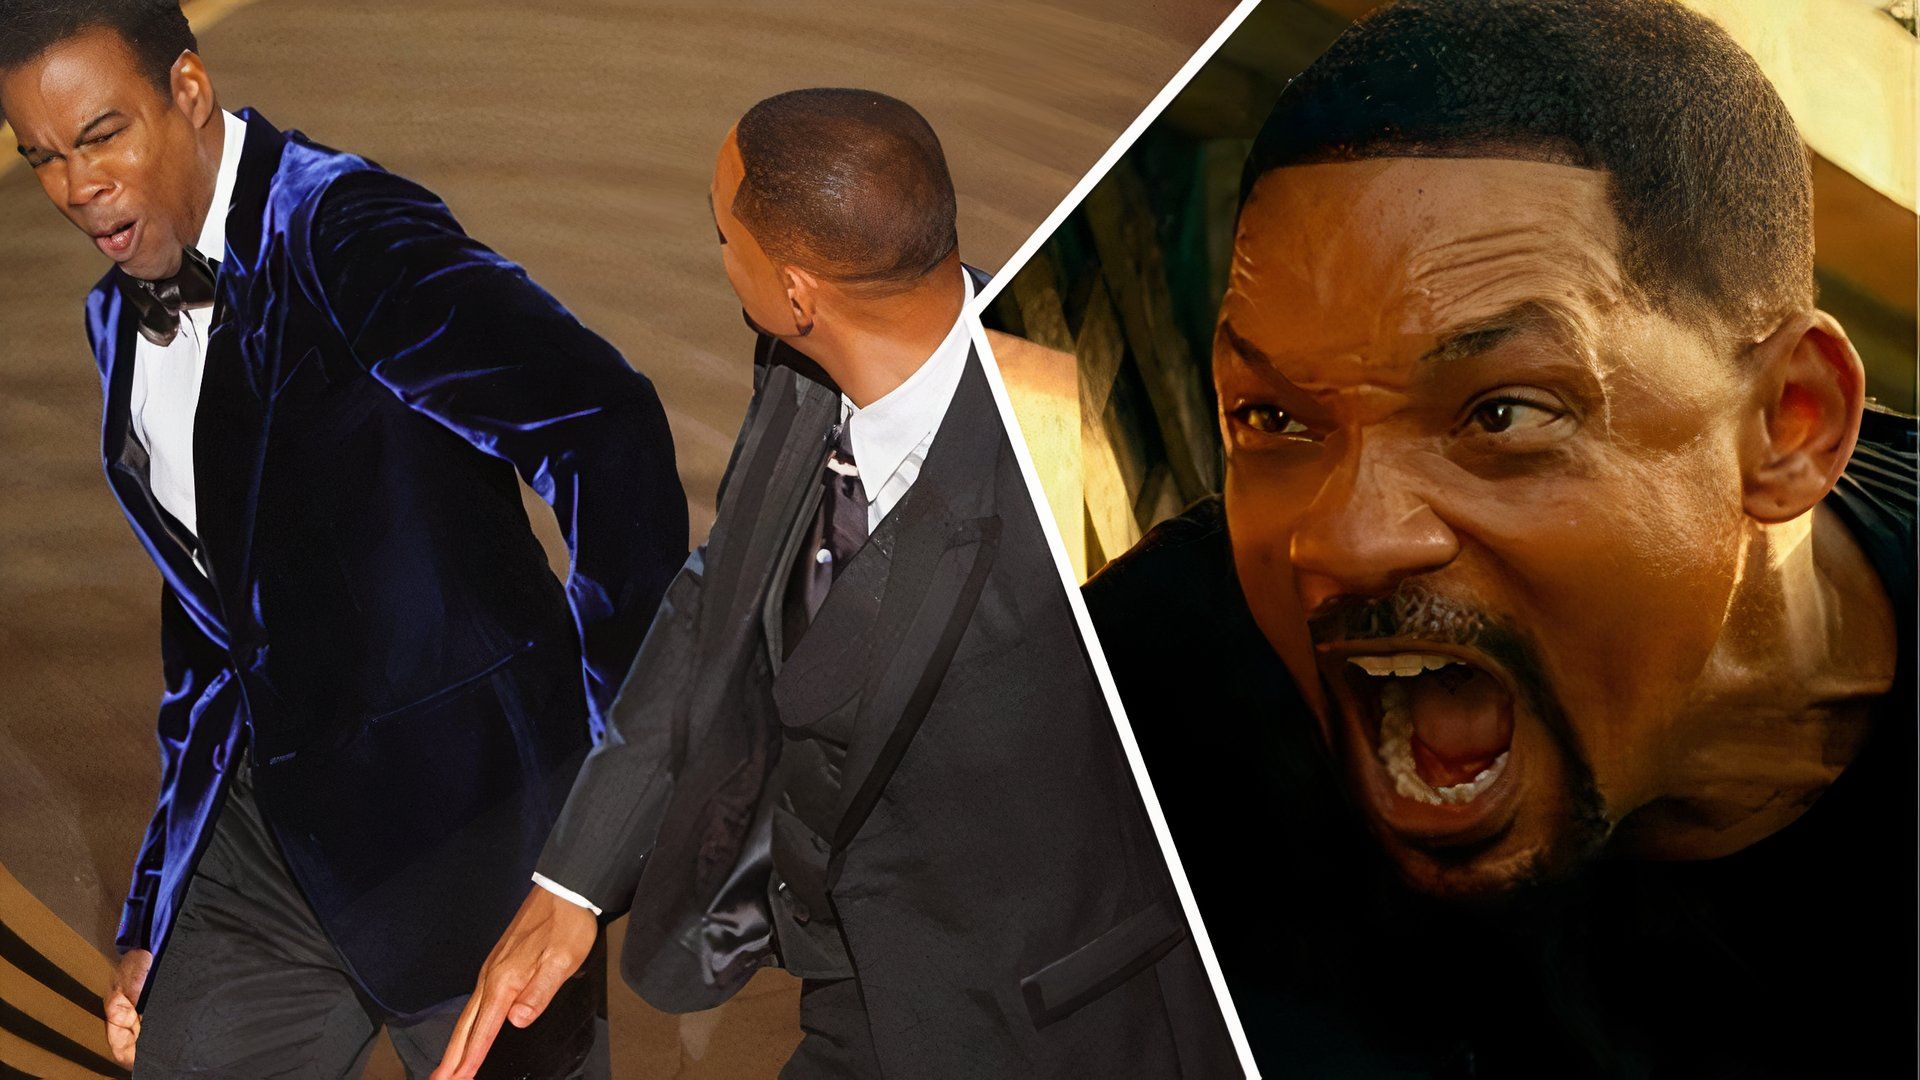 Bad Boys 4 Features ‘Oscars Slap’ Moment for Will Smith, but Is It Tasteless?